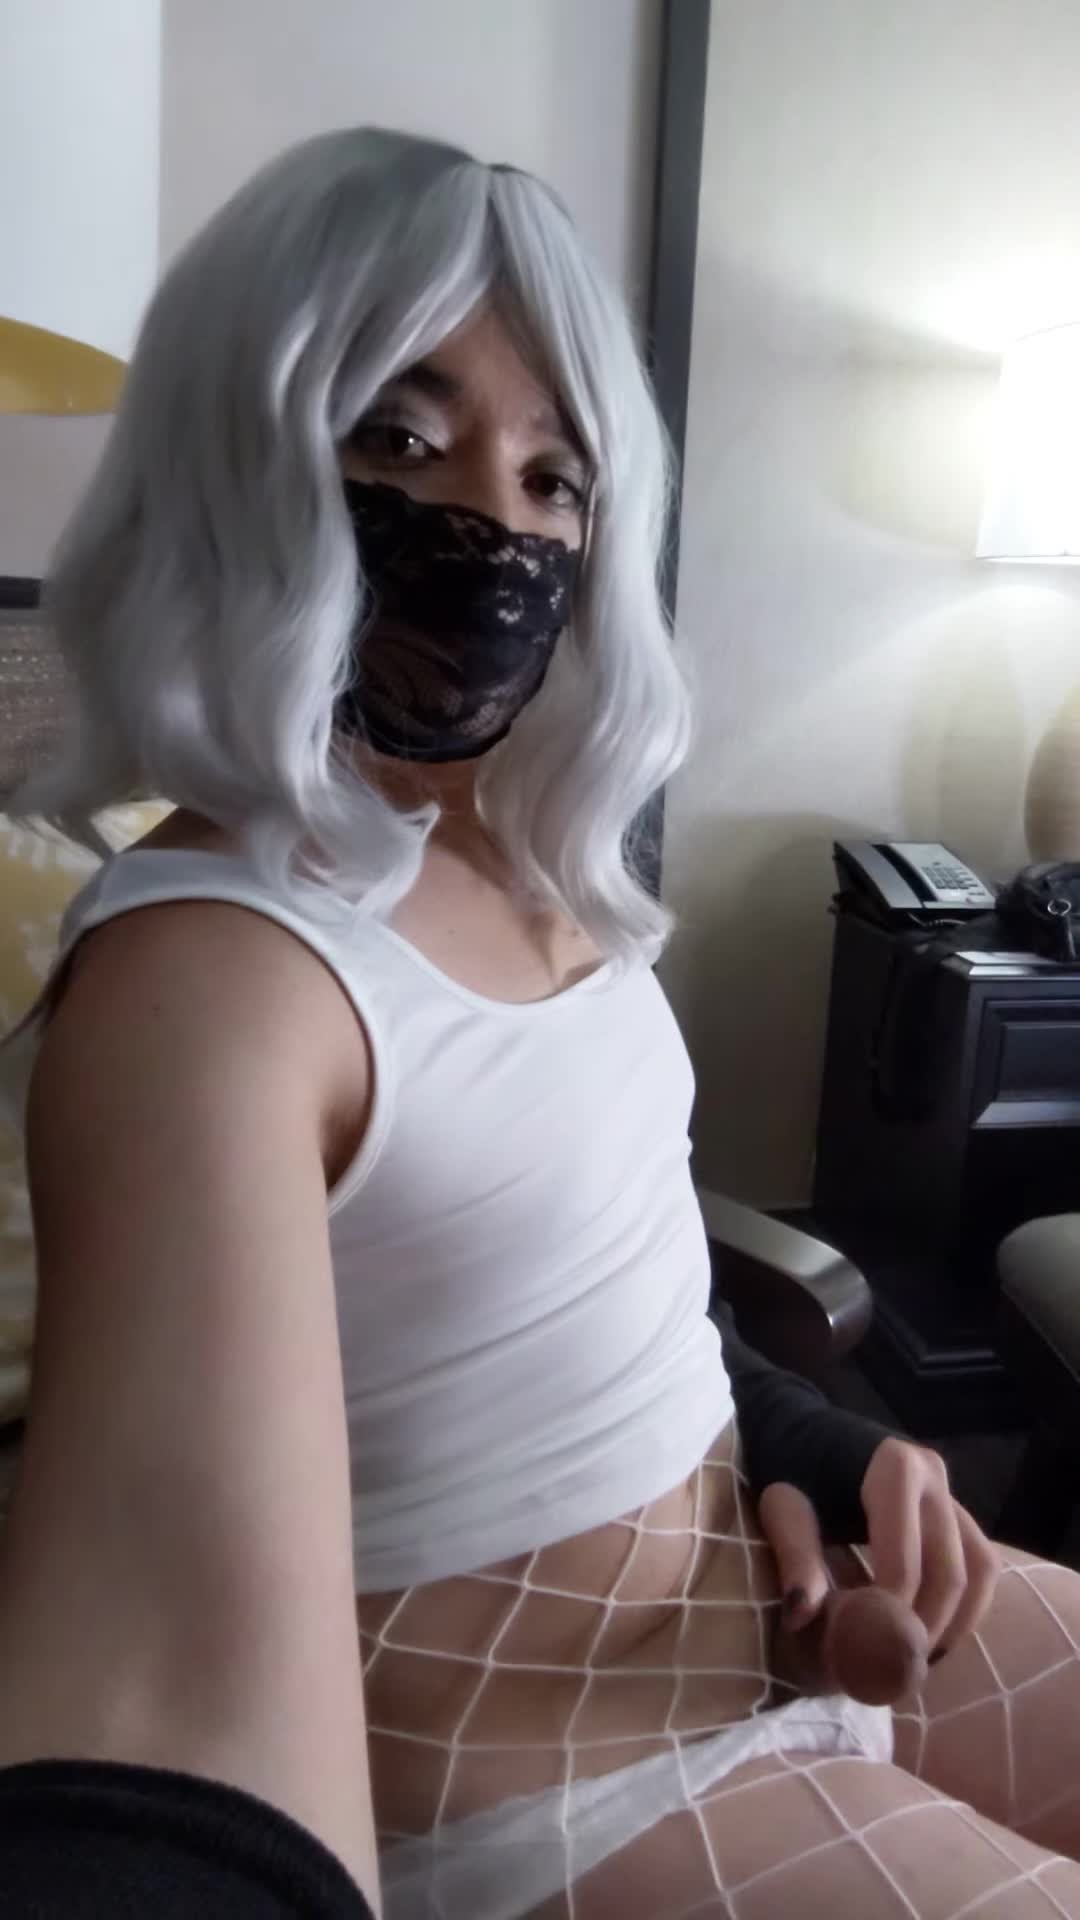 Video by Femboy Esha with the username @eshalewdus, who is a verified user,  August 19, 2023 at 8:33 PM and the text says 'I couldn't help it~

#femboy #sissy #feminization #crossdressing #lewd #masterbation'